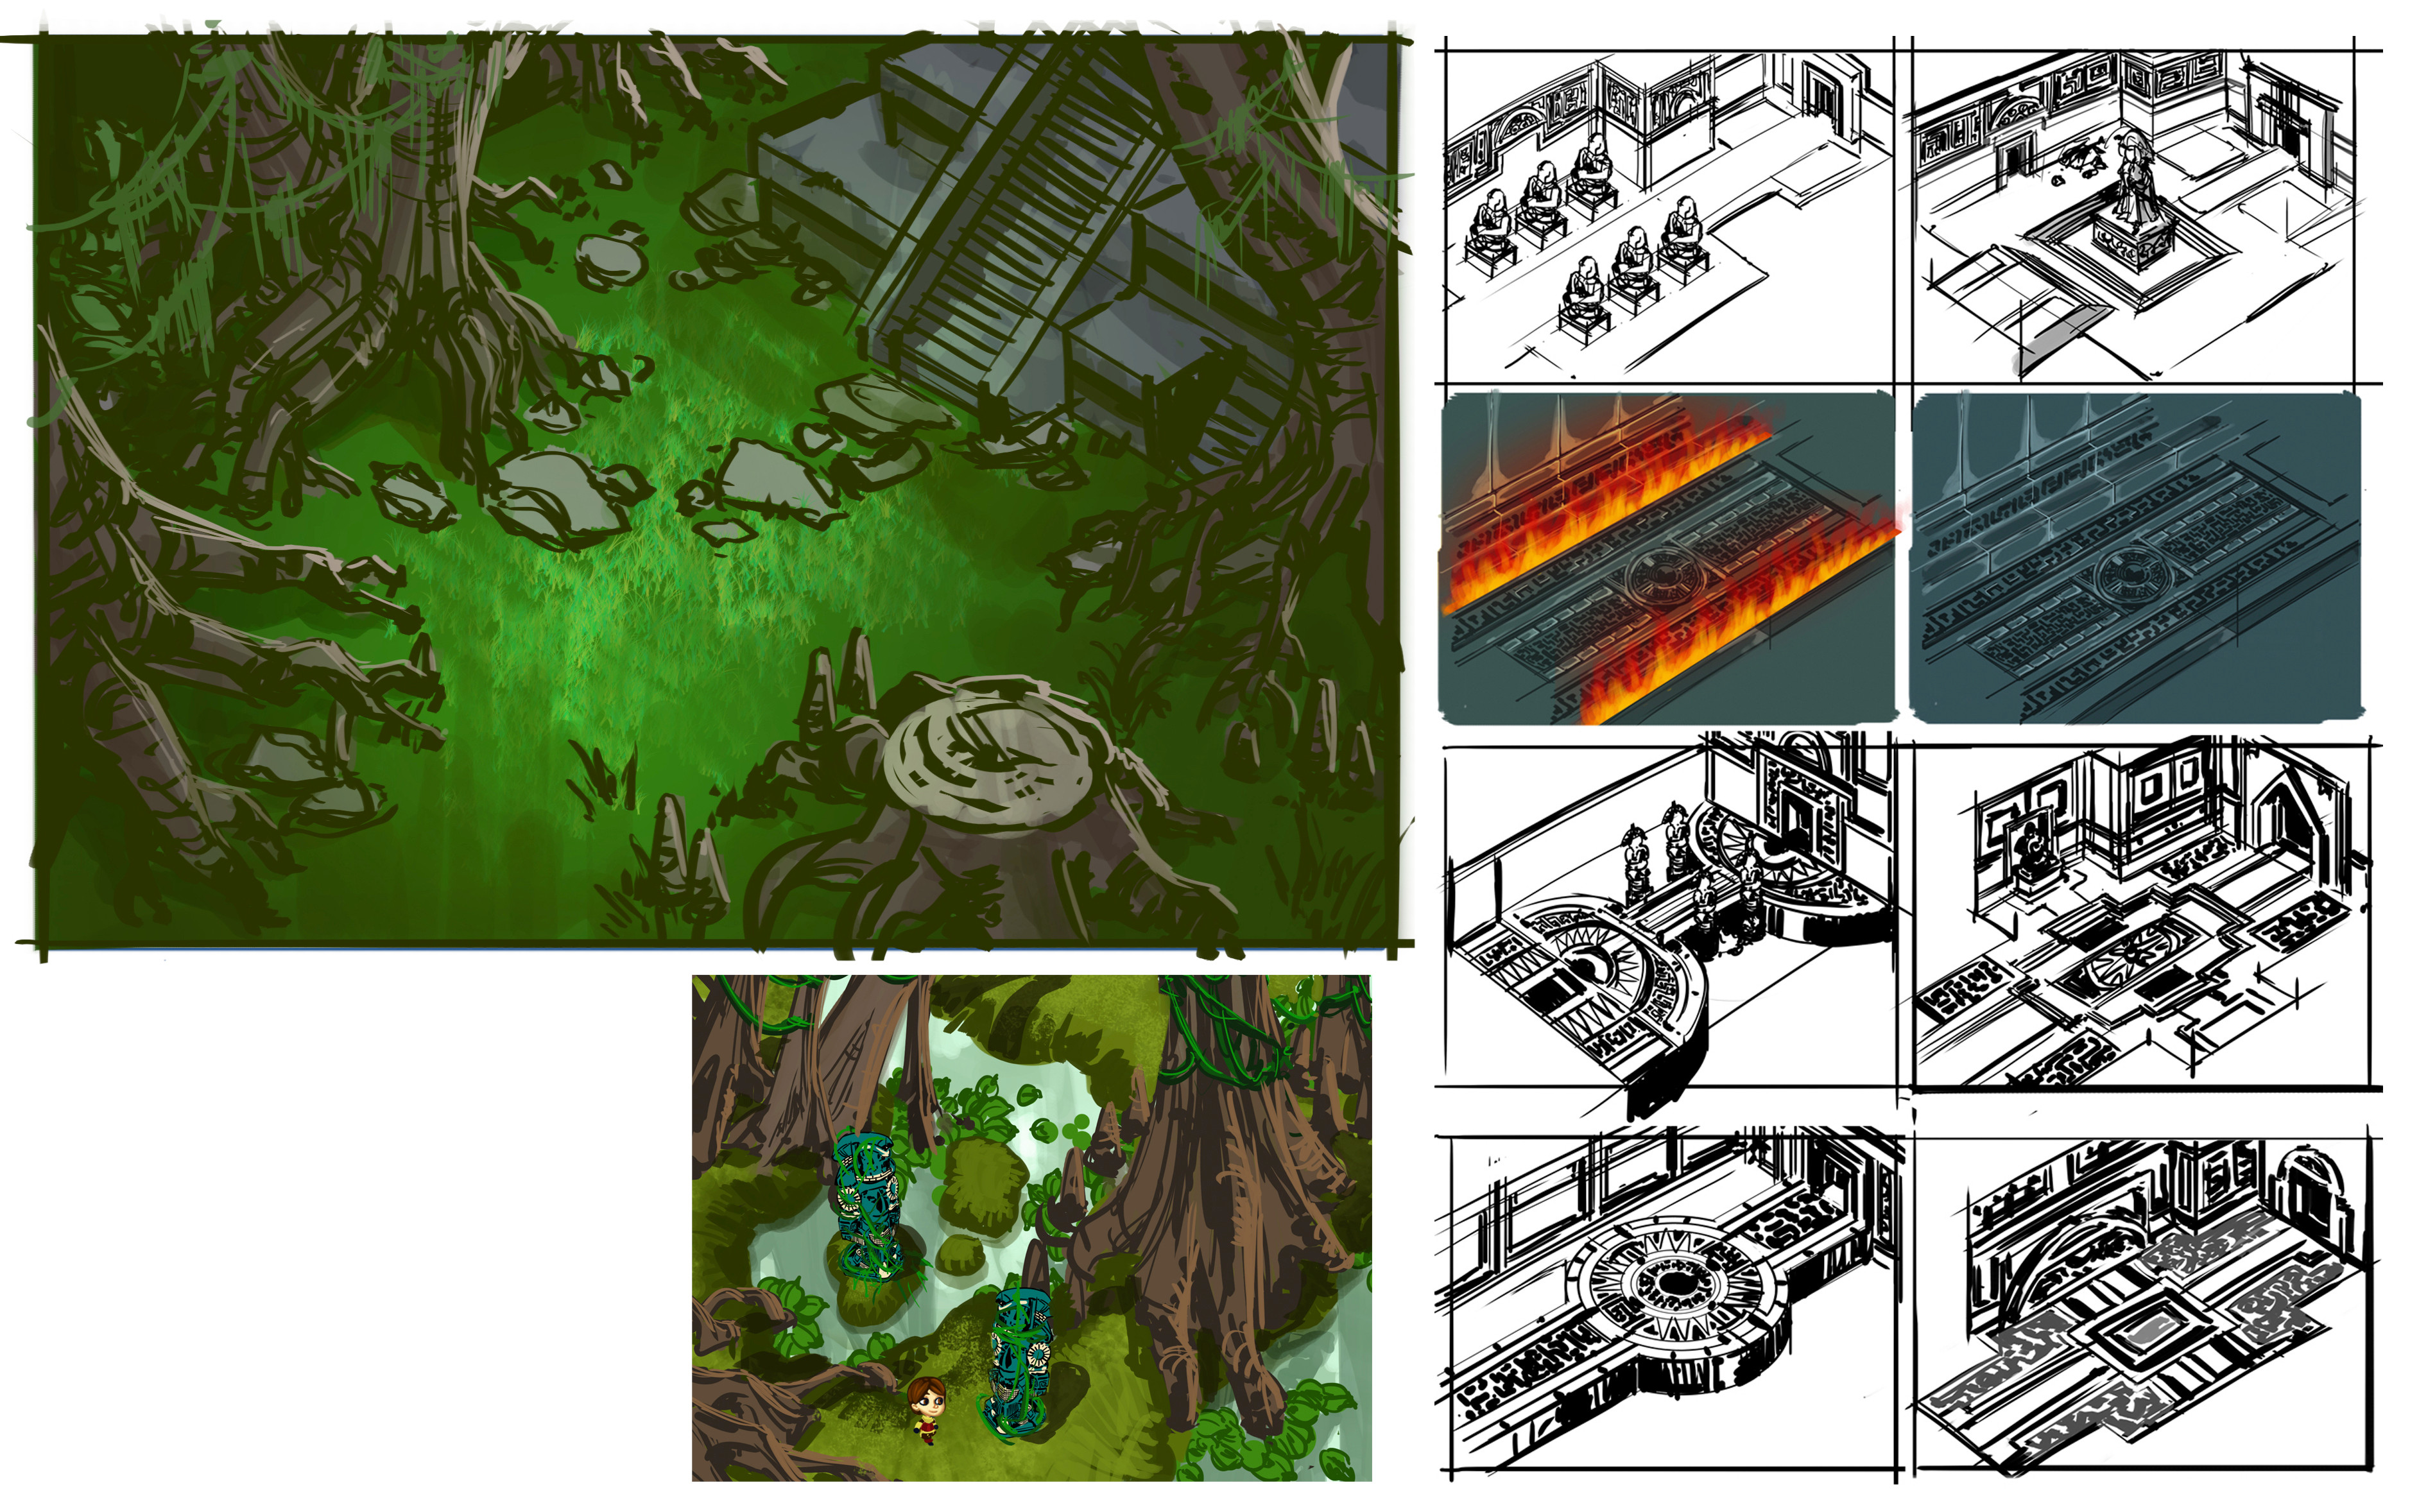 Jungle layout sketches